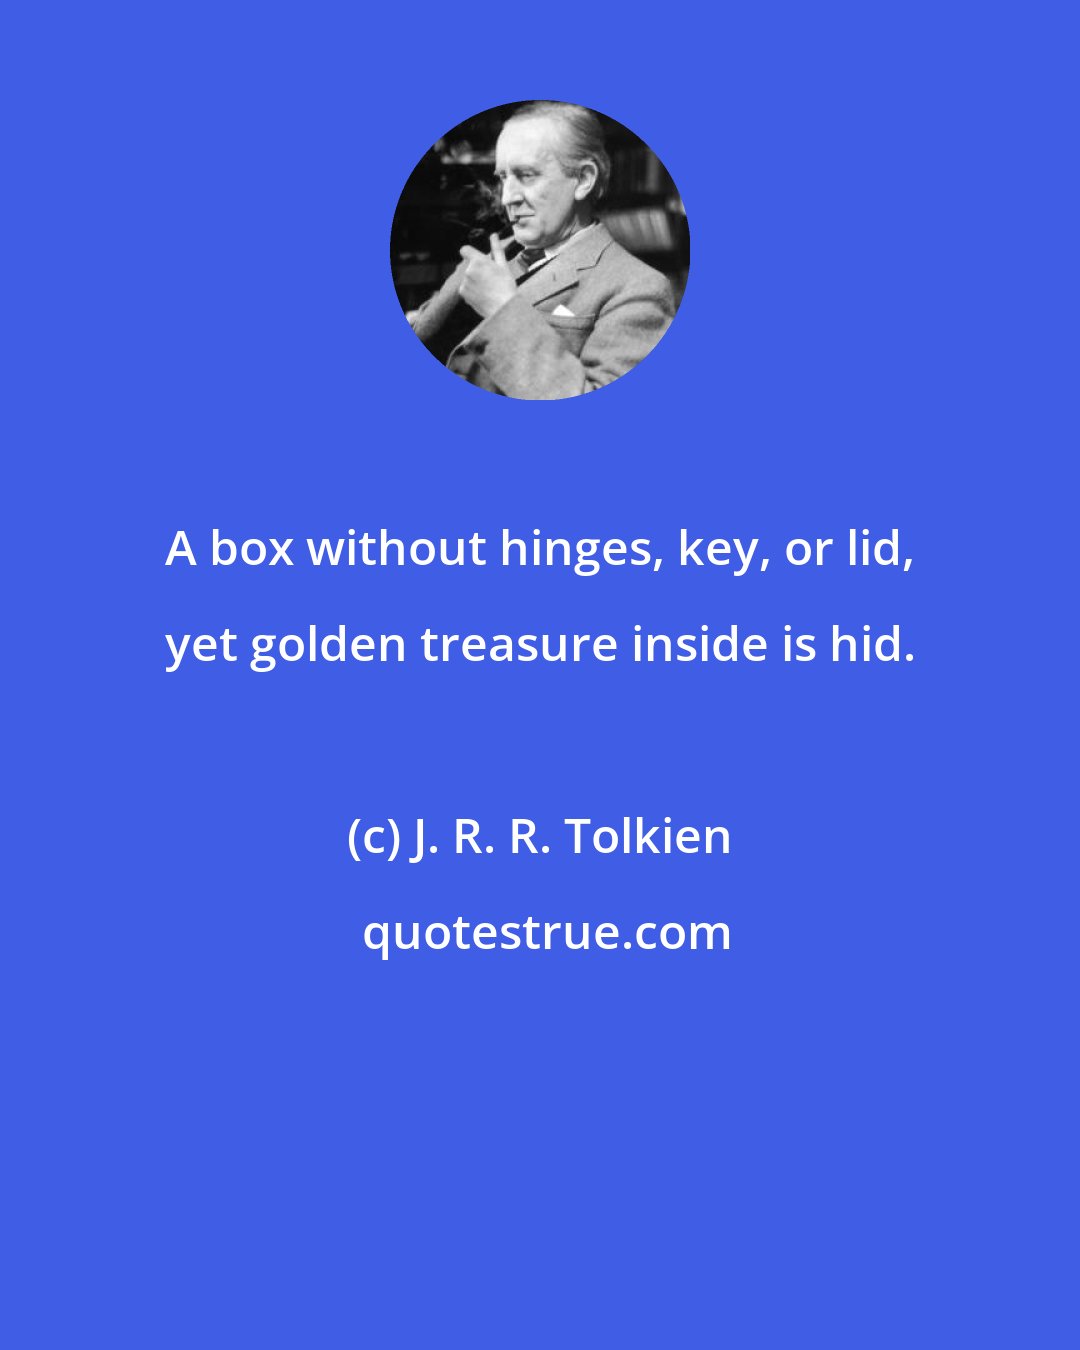 J. R. R. Tolkien: A box without hinges, key, or lid, yet golden treasure inside is hid.